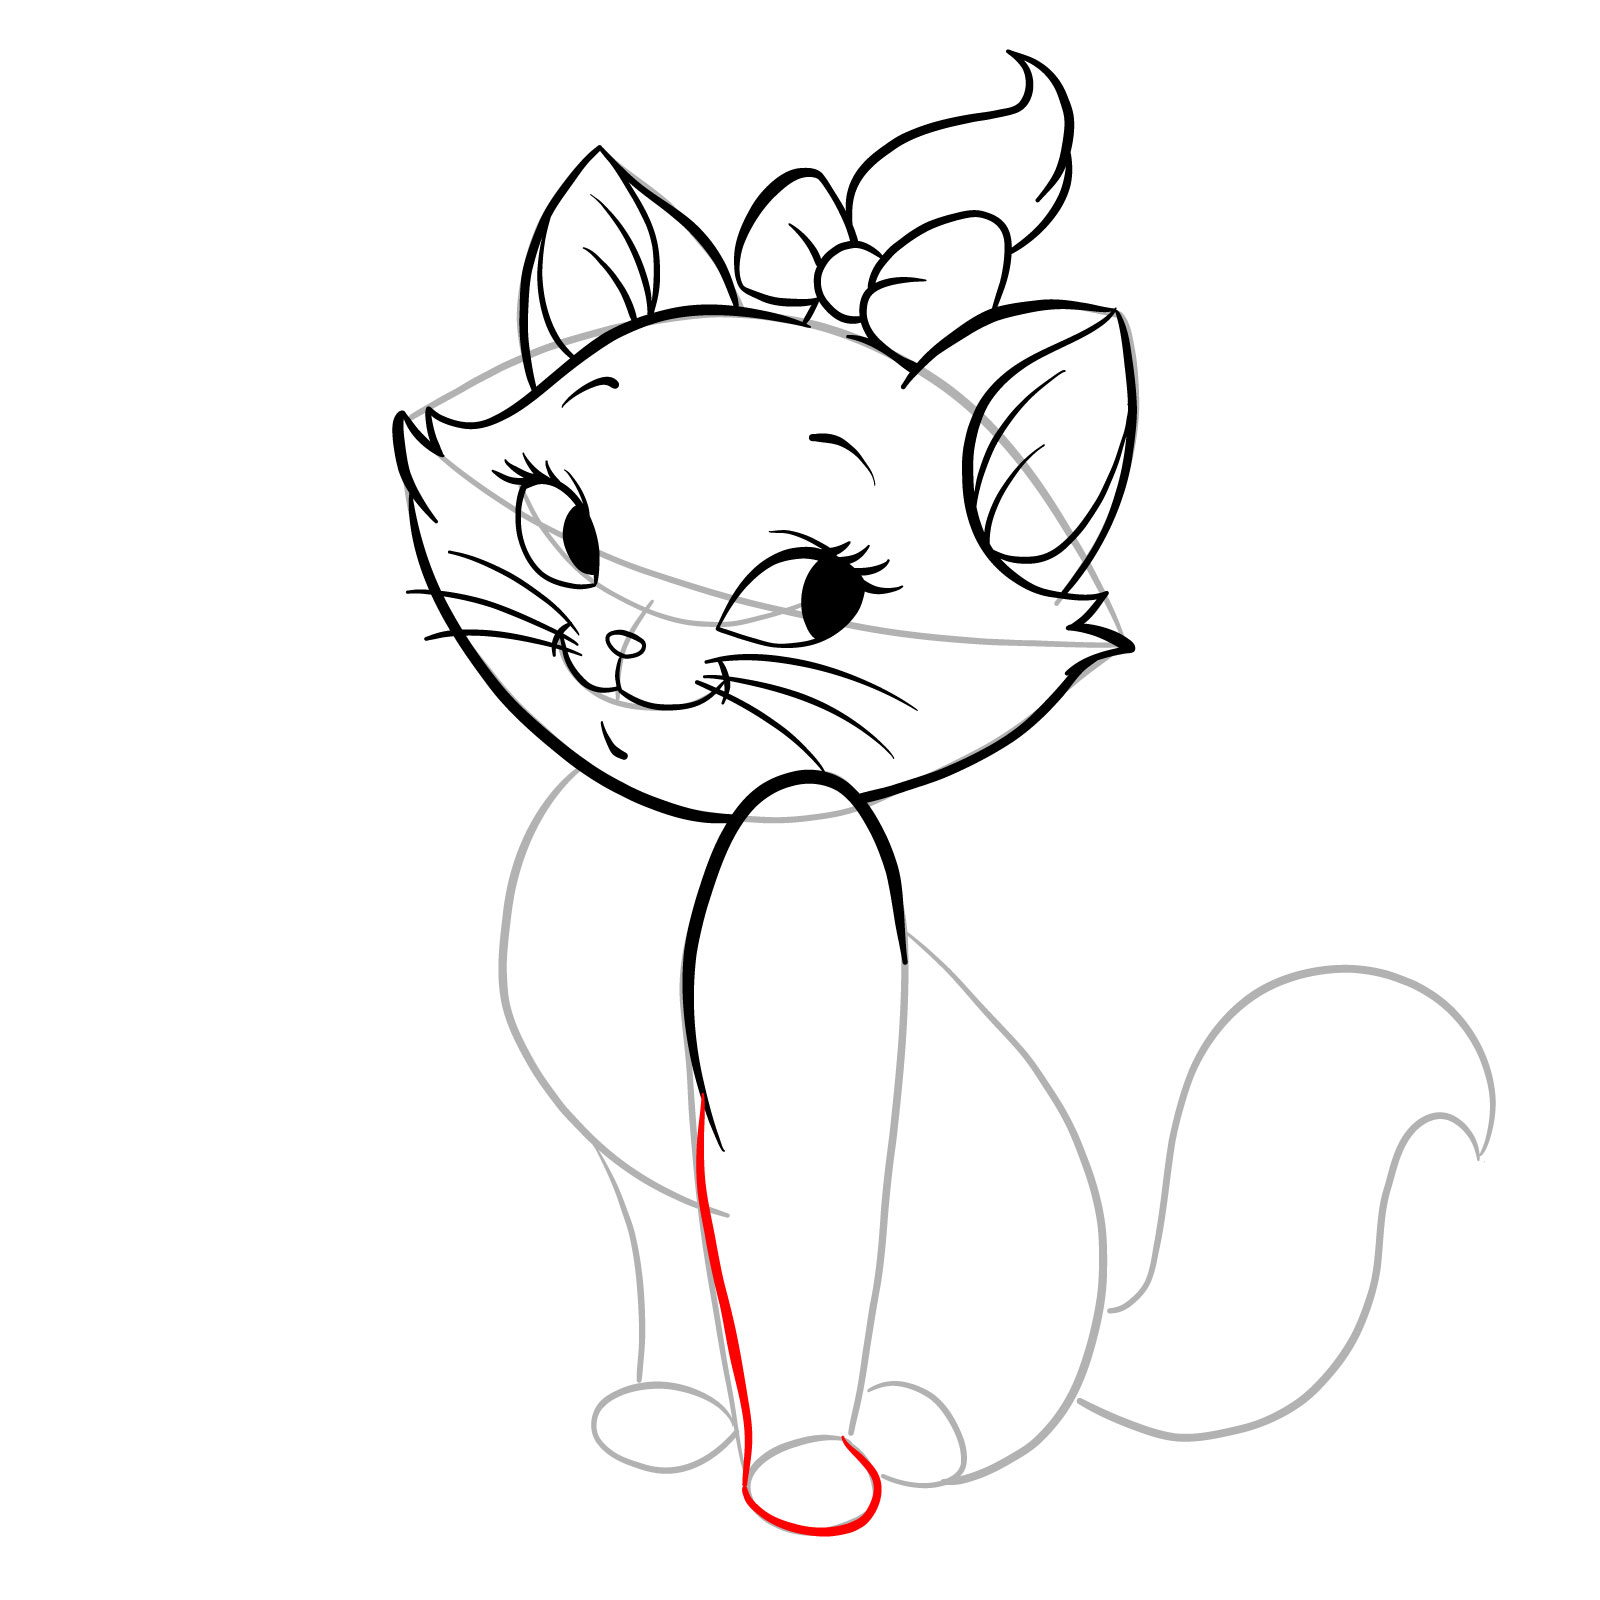 How to draw Marie from The Aristocats - step 17